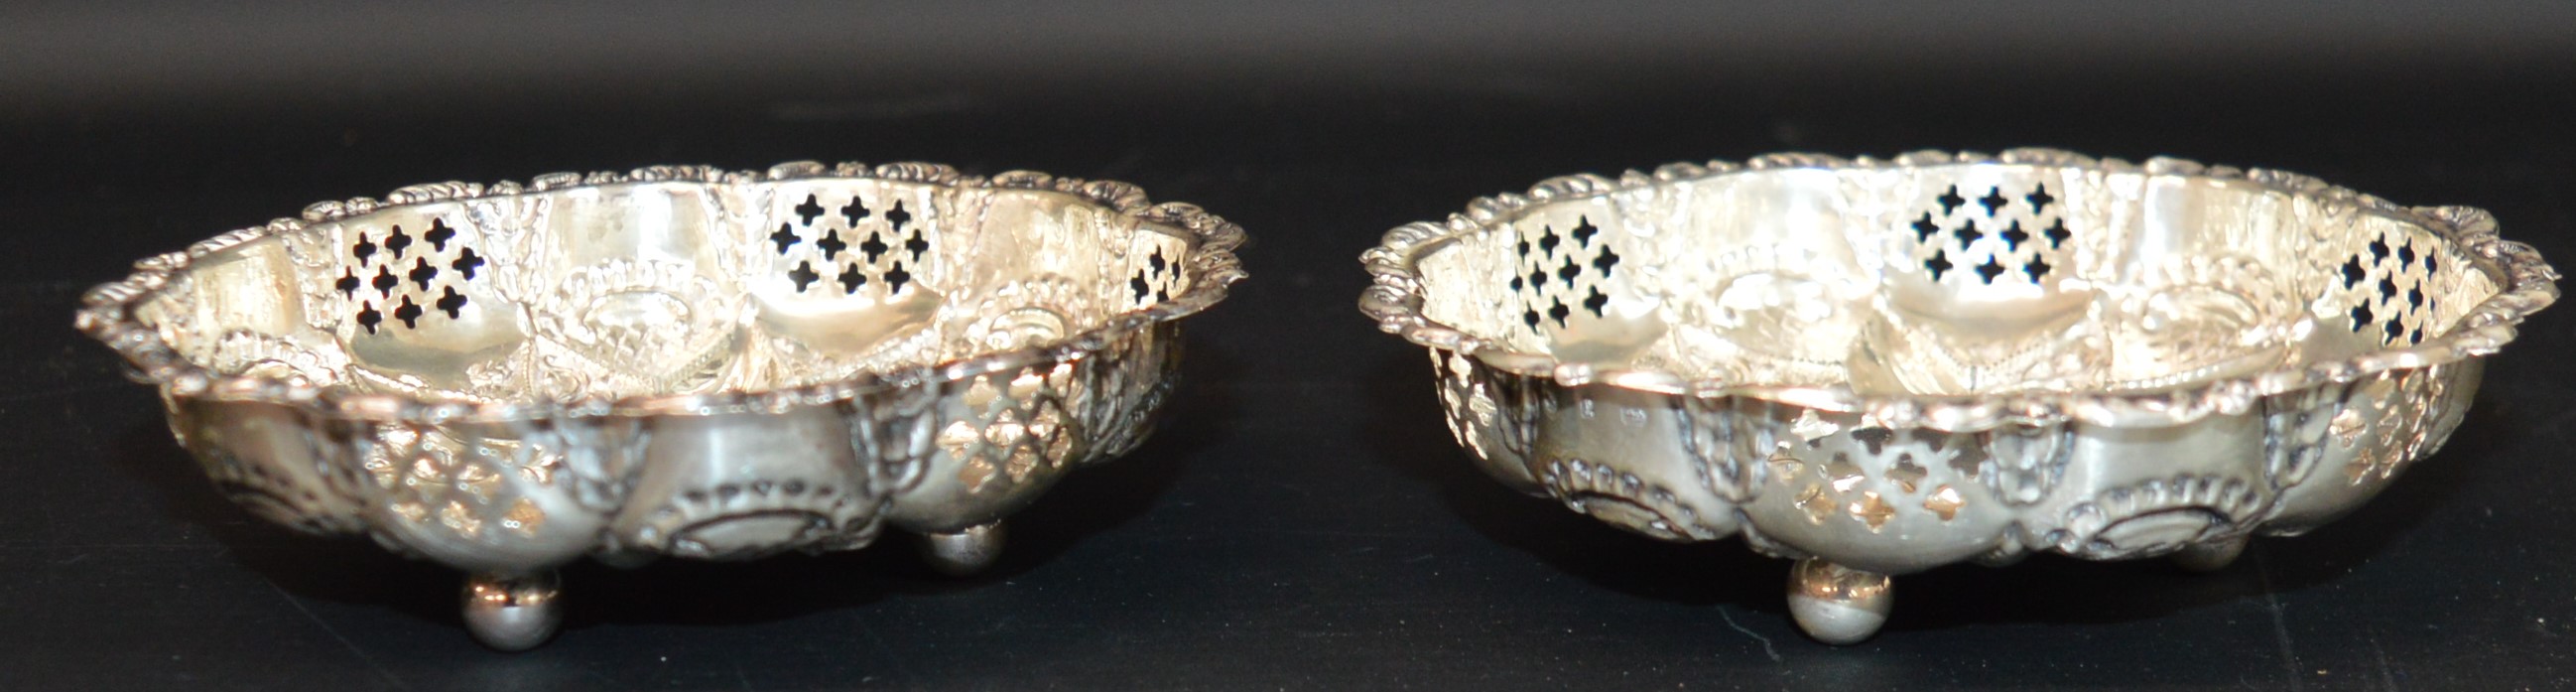 Pair of Victorian pierced silver dishes with embossed decoration (possibly Miller Bros), - Image 2 of 3